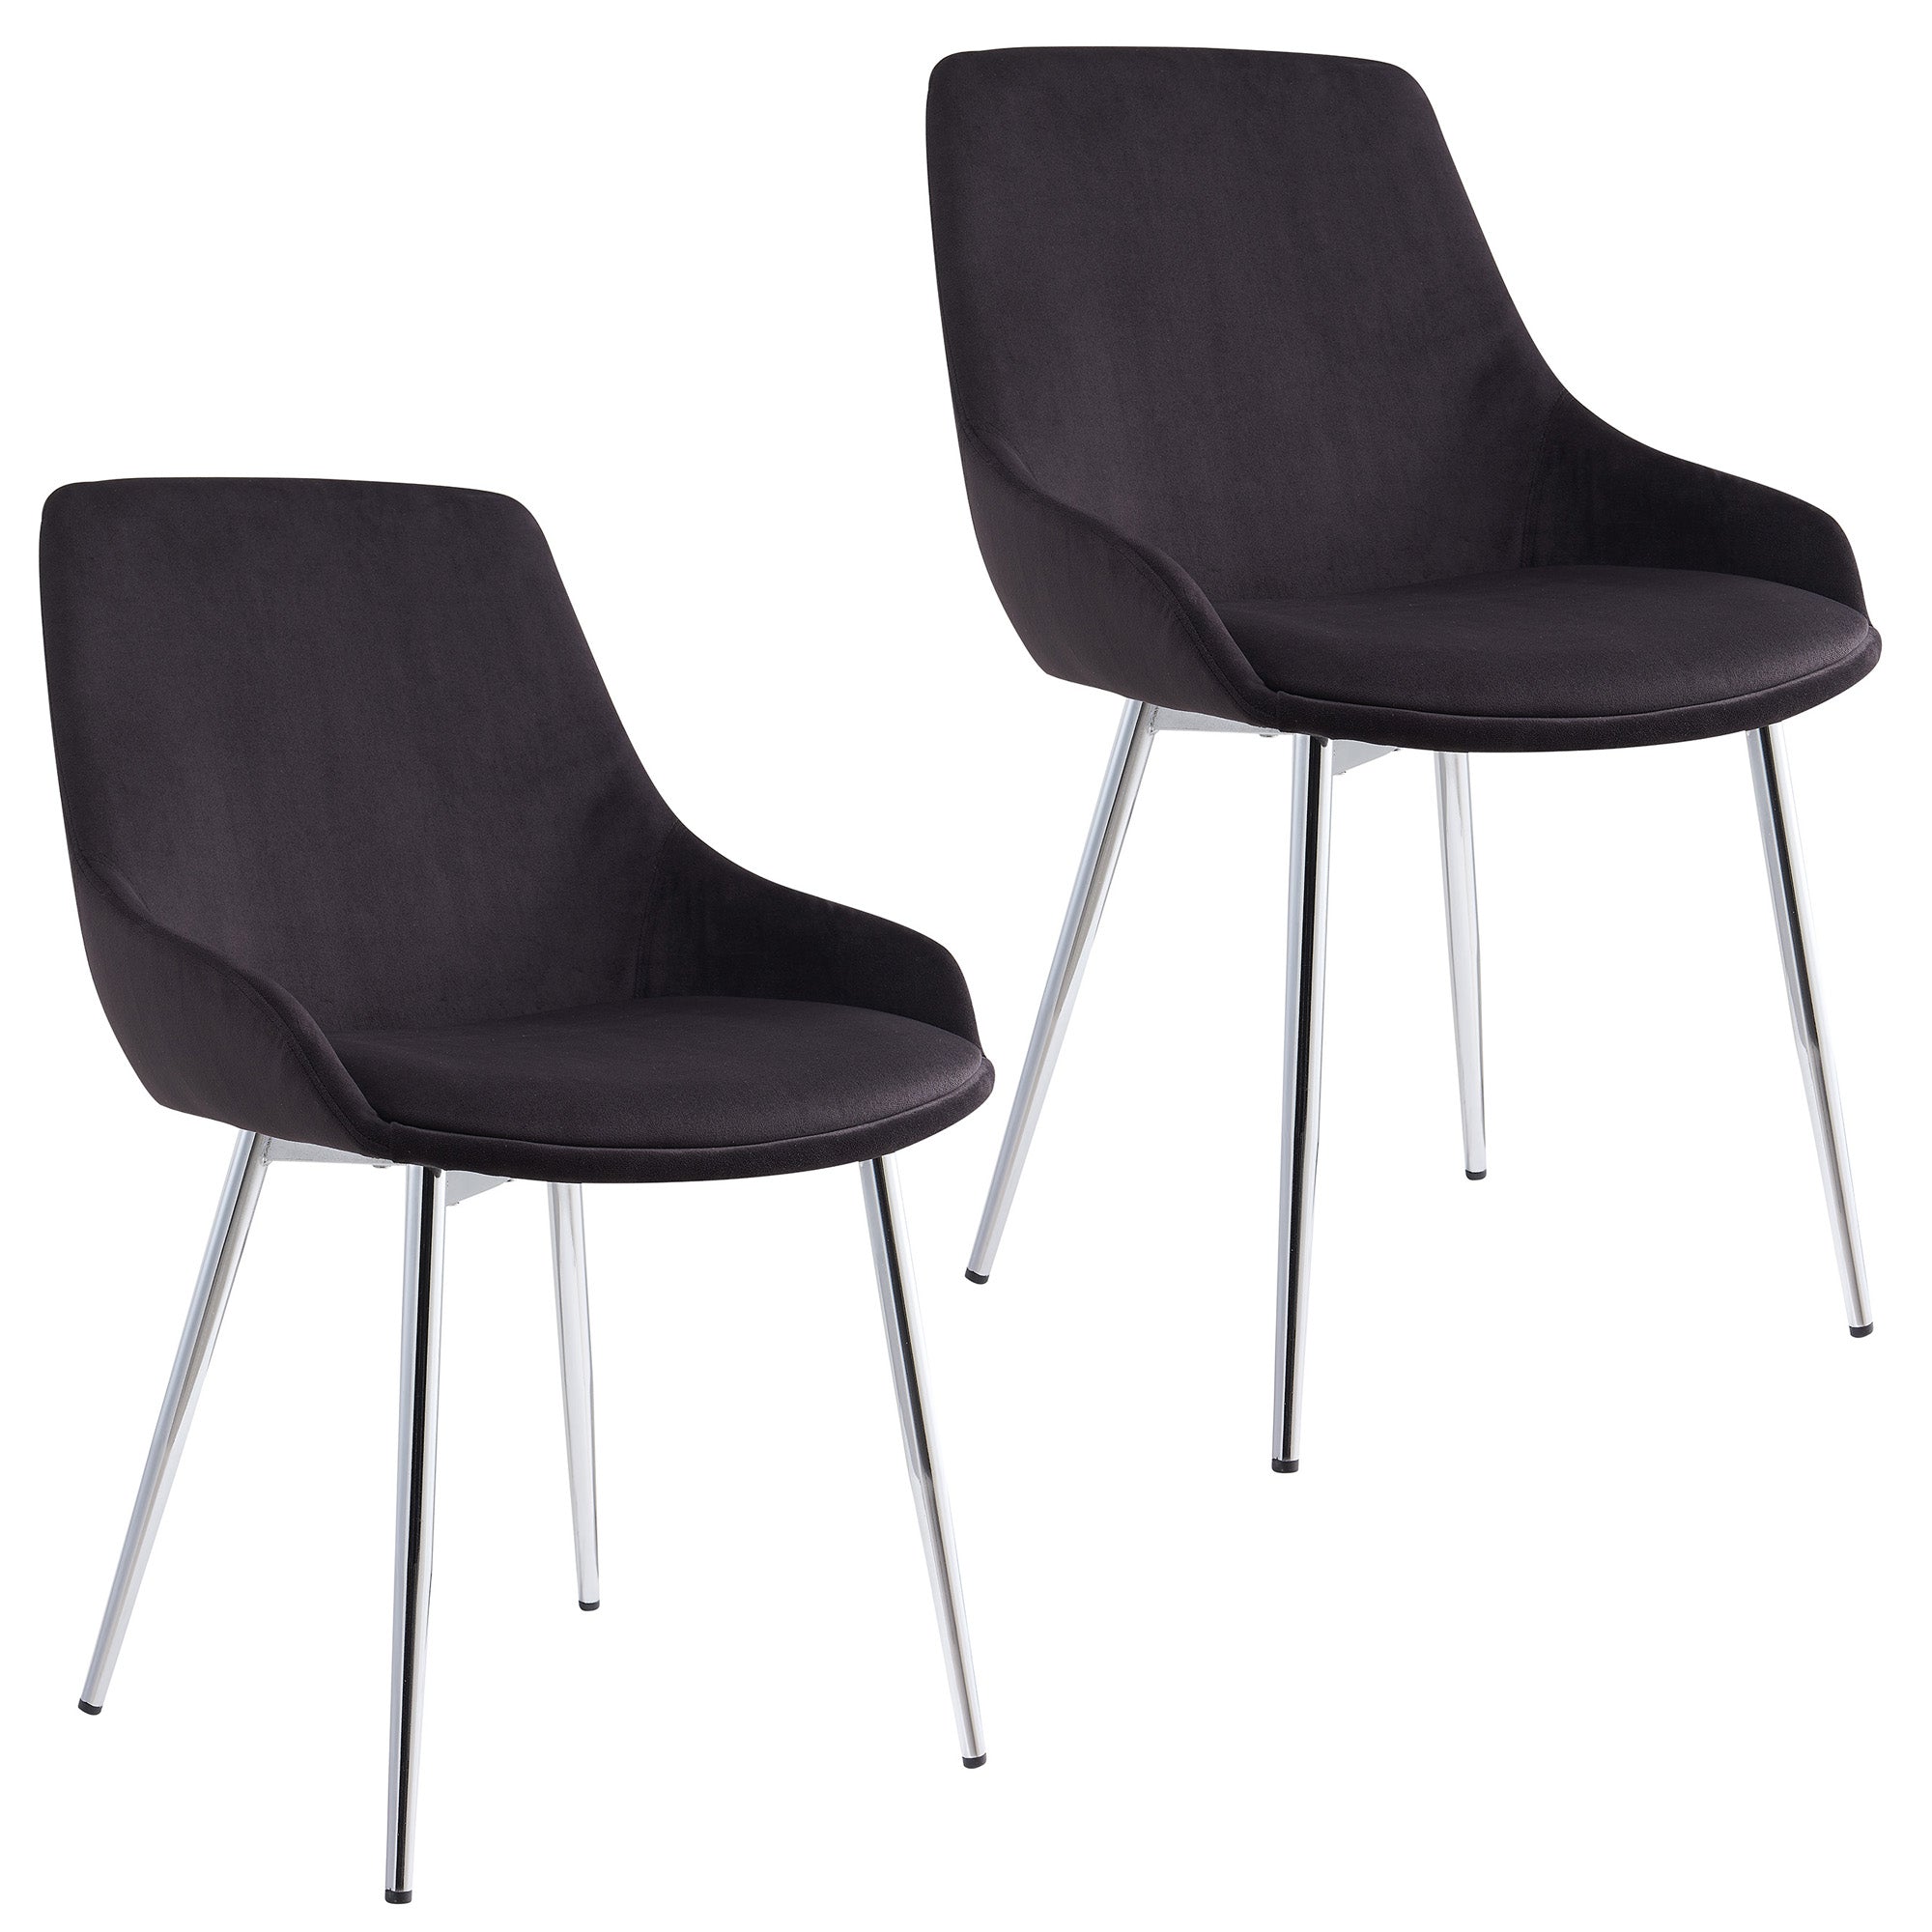 Kaitlyn Dining Chair - Black (Set of 2)